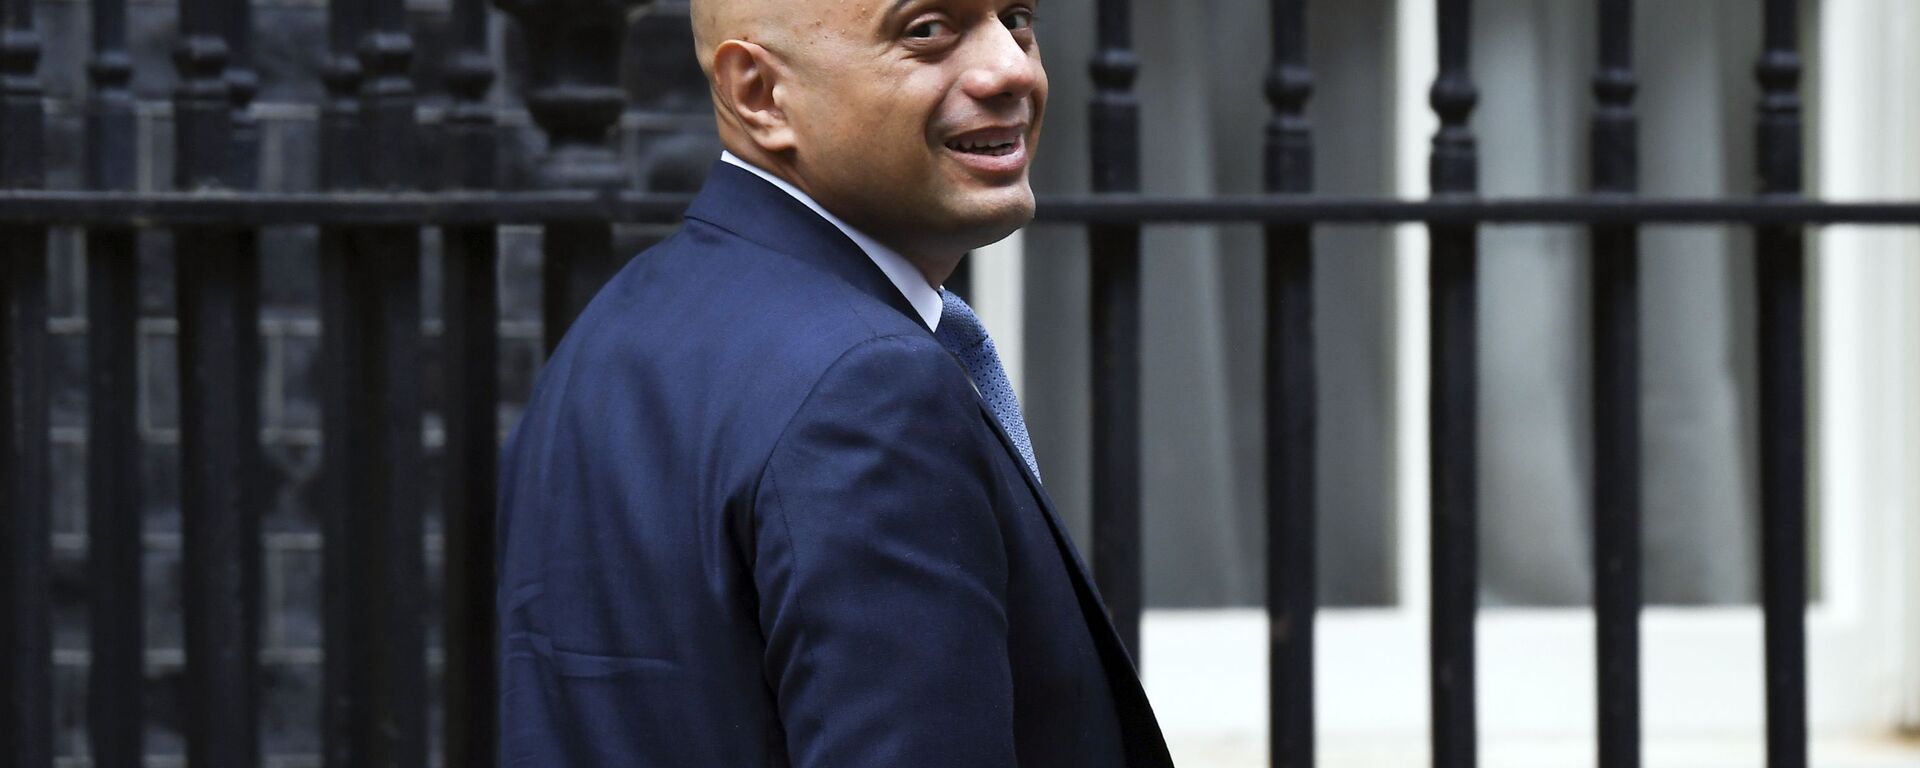 British Chancellor of the Exchequer Sajid Javid leaves 11 Downing Street in London, Wednesday, 4 September 2019 - Sputnik International, 1920, 09.07.2021